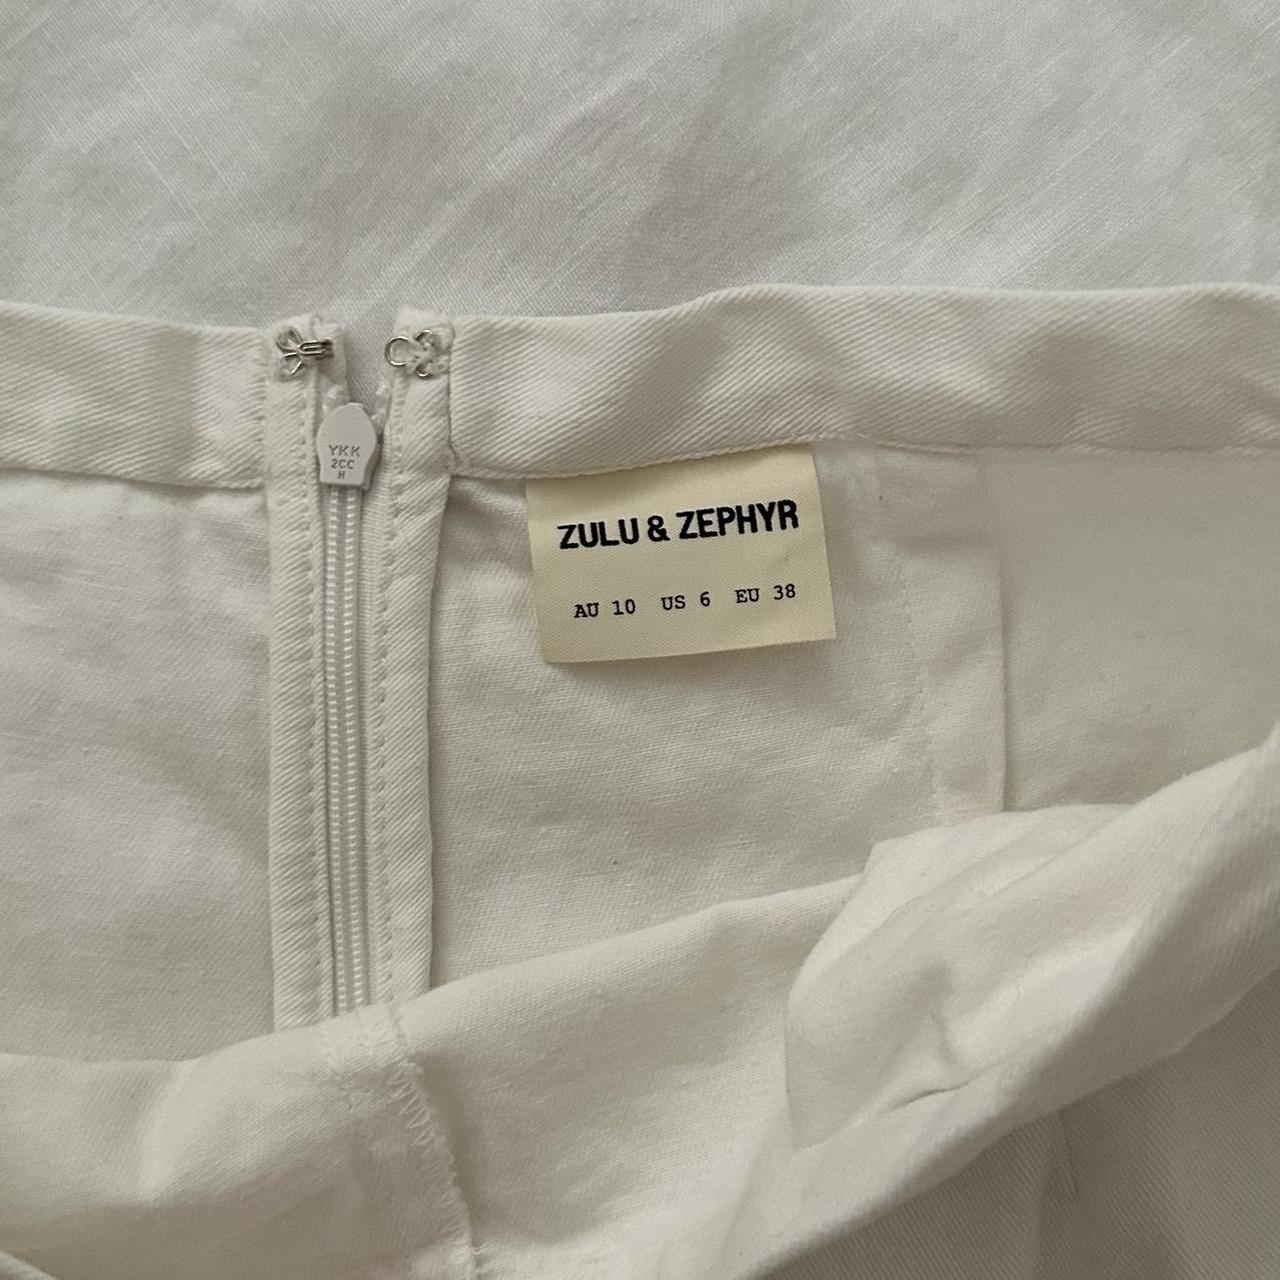 zulu and zephyr white linen pants - bought at a... - Depop